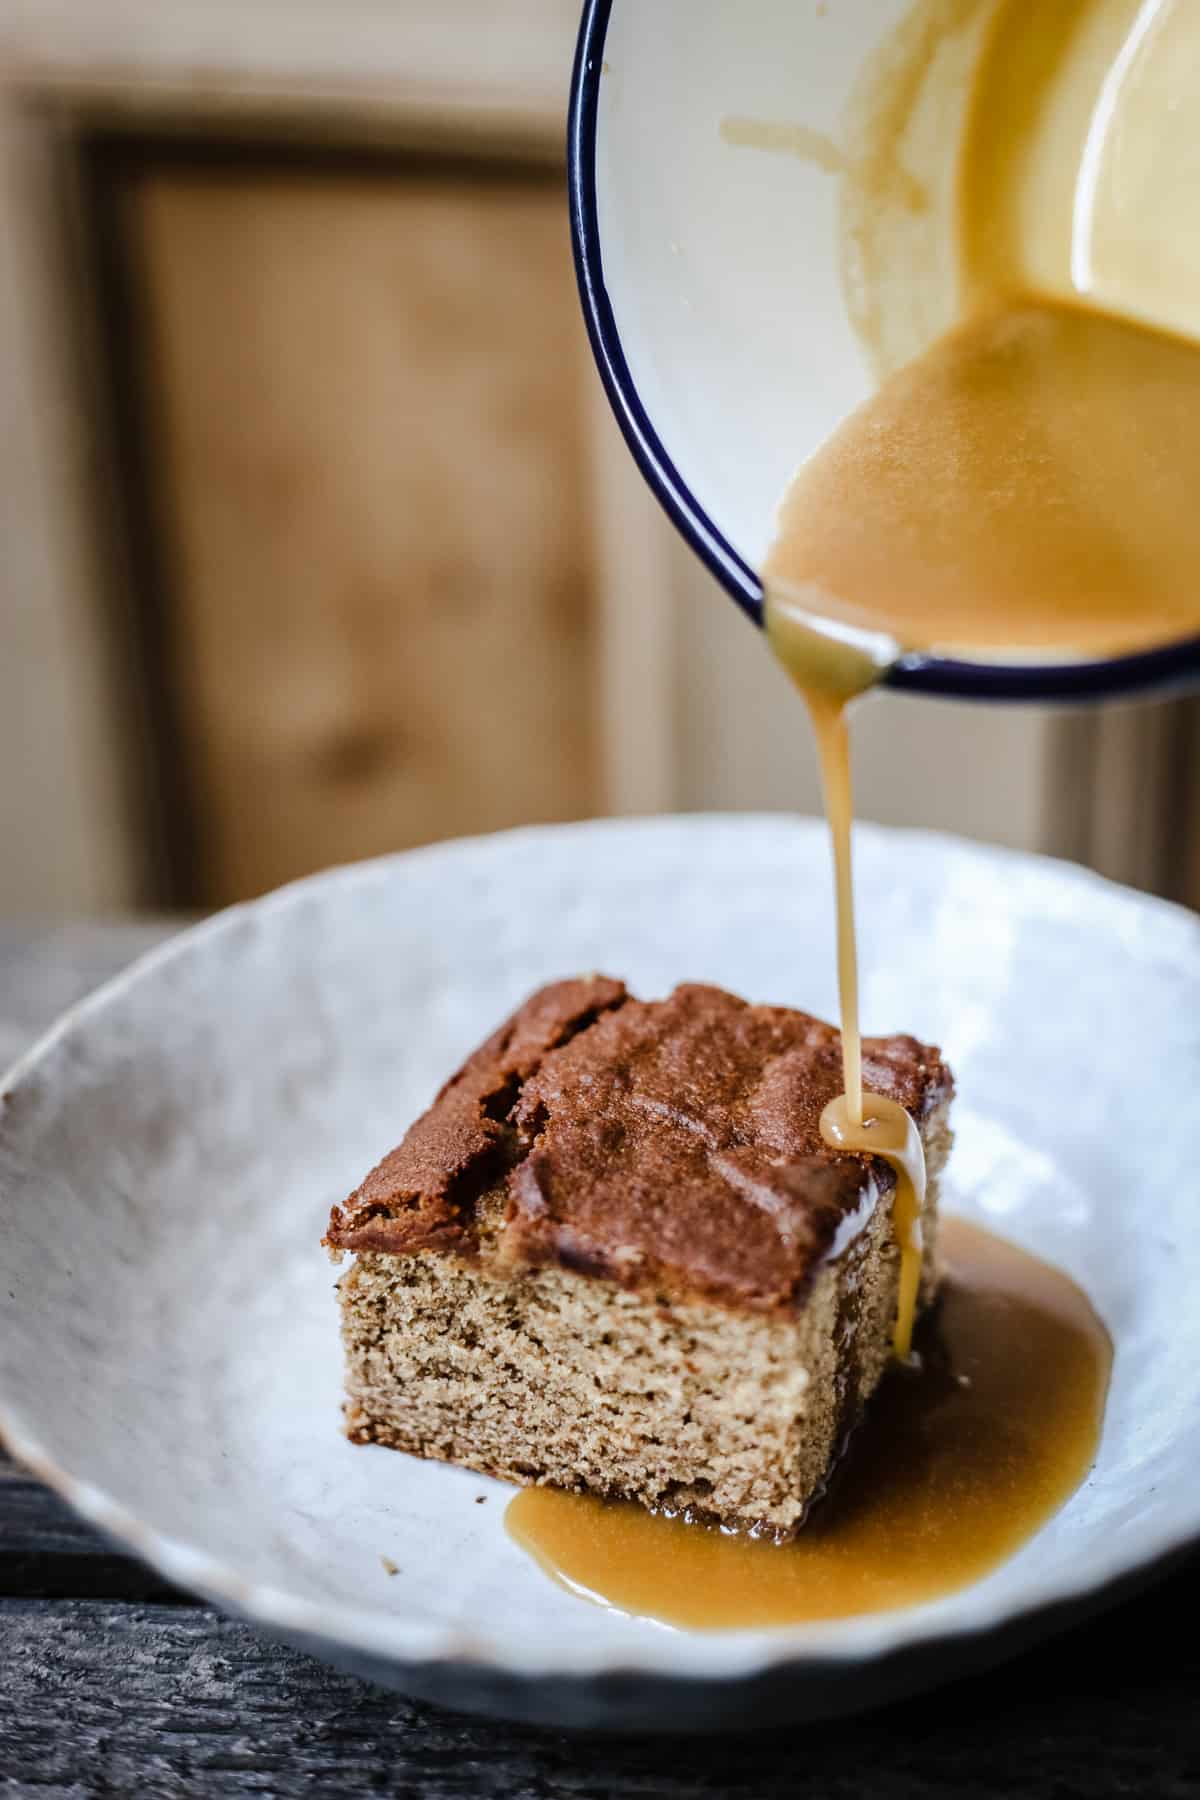 The Baileys in this Sticky Toffee Baileys Pudding is the best way to reinvent the British pub dessert classic. Baileys is baked into the sponge and poured liberally into the toffee sauce for heavenly reasons. This gluten-free version also goes one step further by using teff flour instead of wheat flour adding a further complexity of flavour.